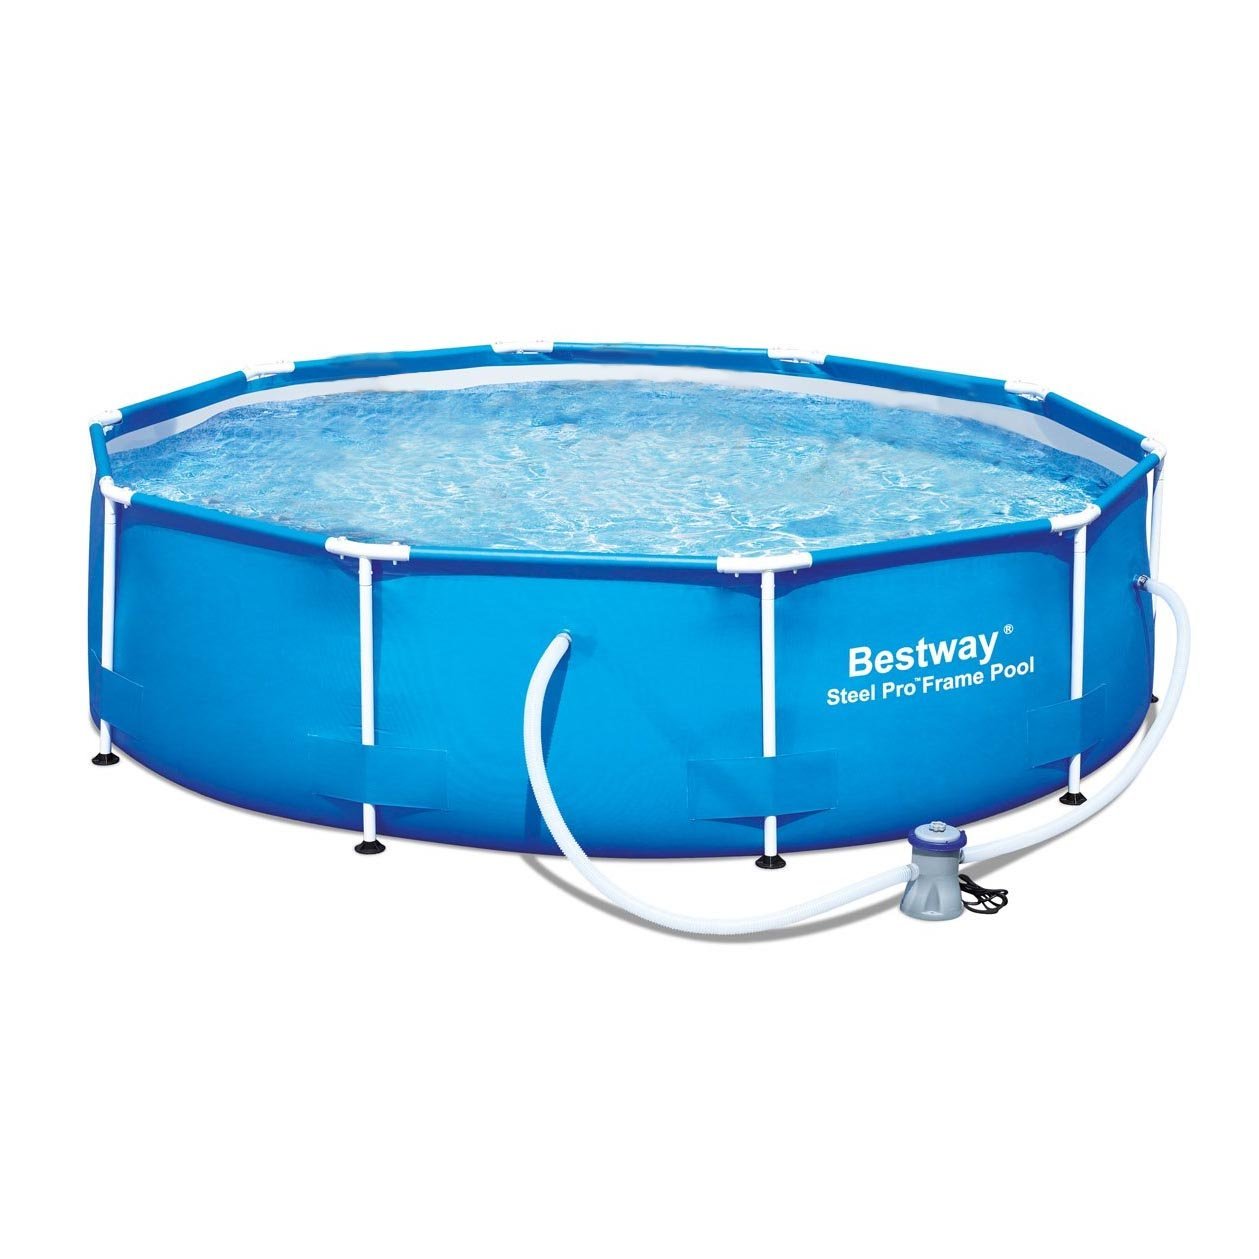 Bestway 12' x 36" Steel Pro Frame Above Ground Family Swimming Pool Set w/ Pump